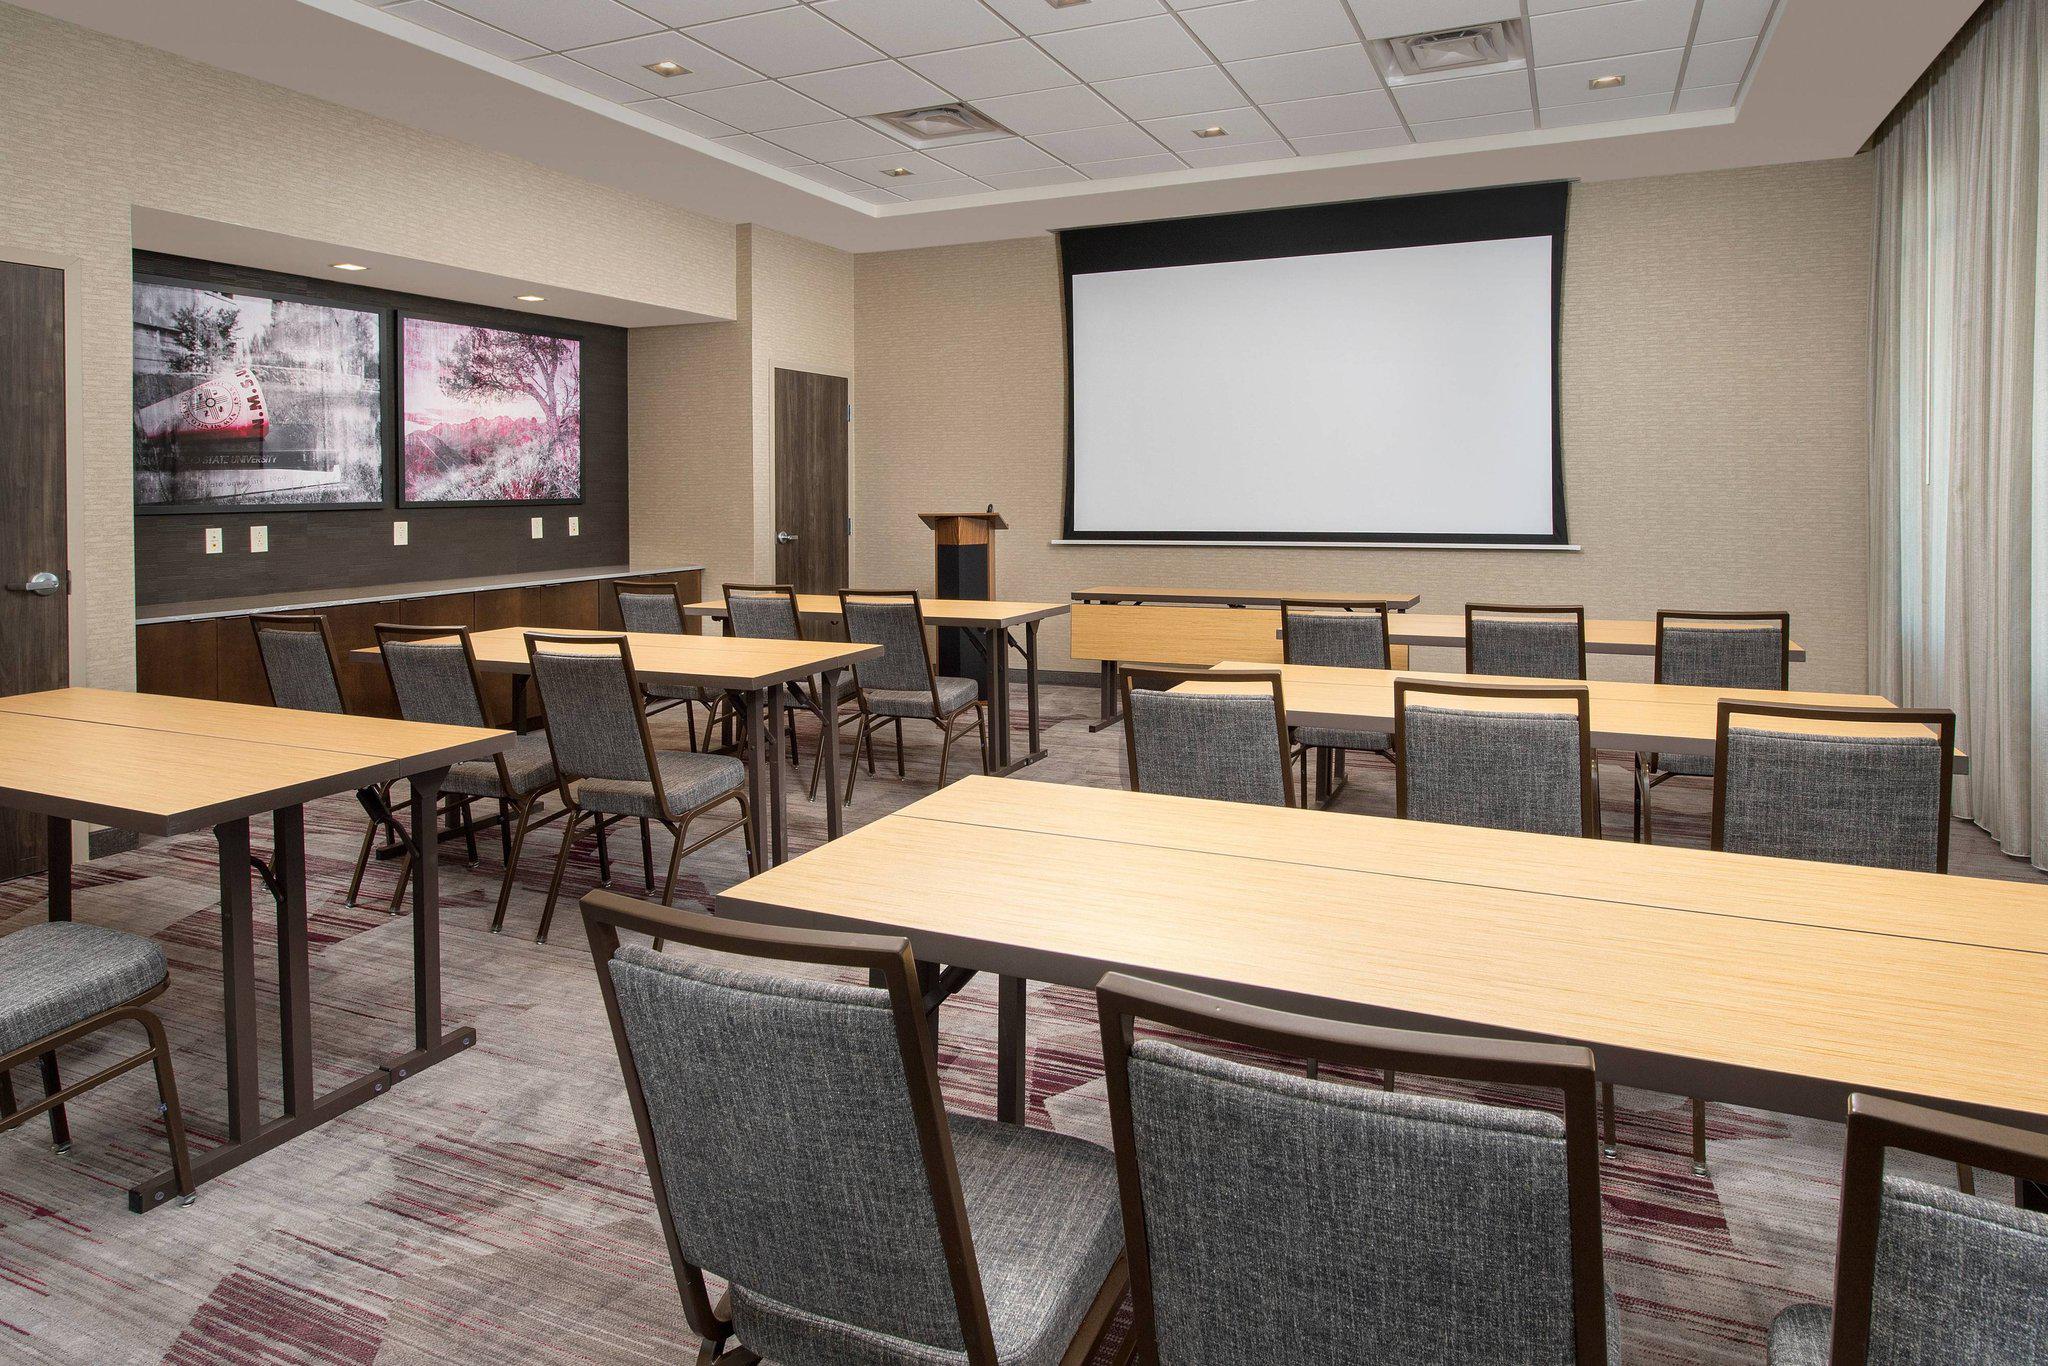 Courtyard by Marriott Las Cruces at NMSU Photo